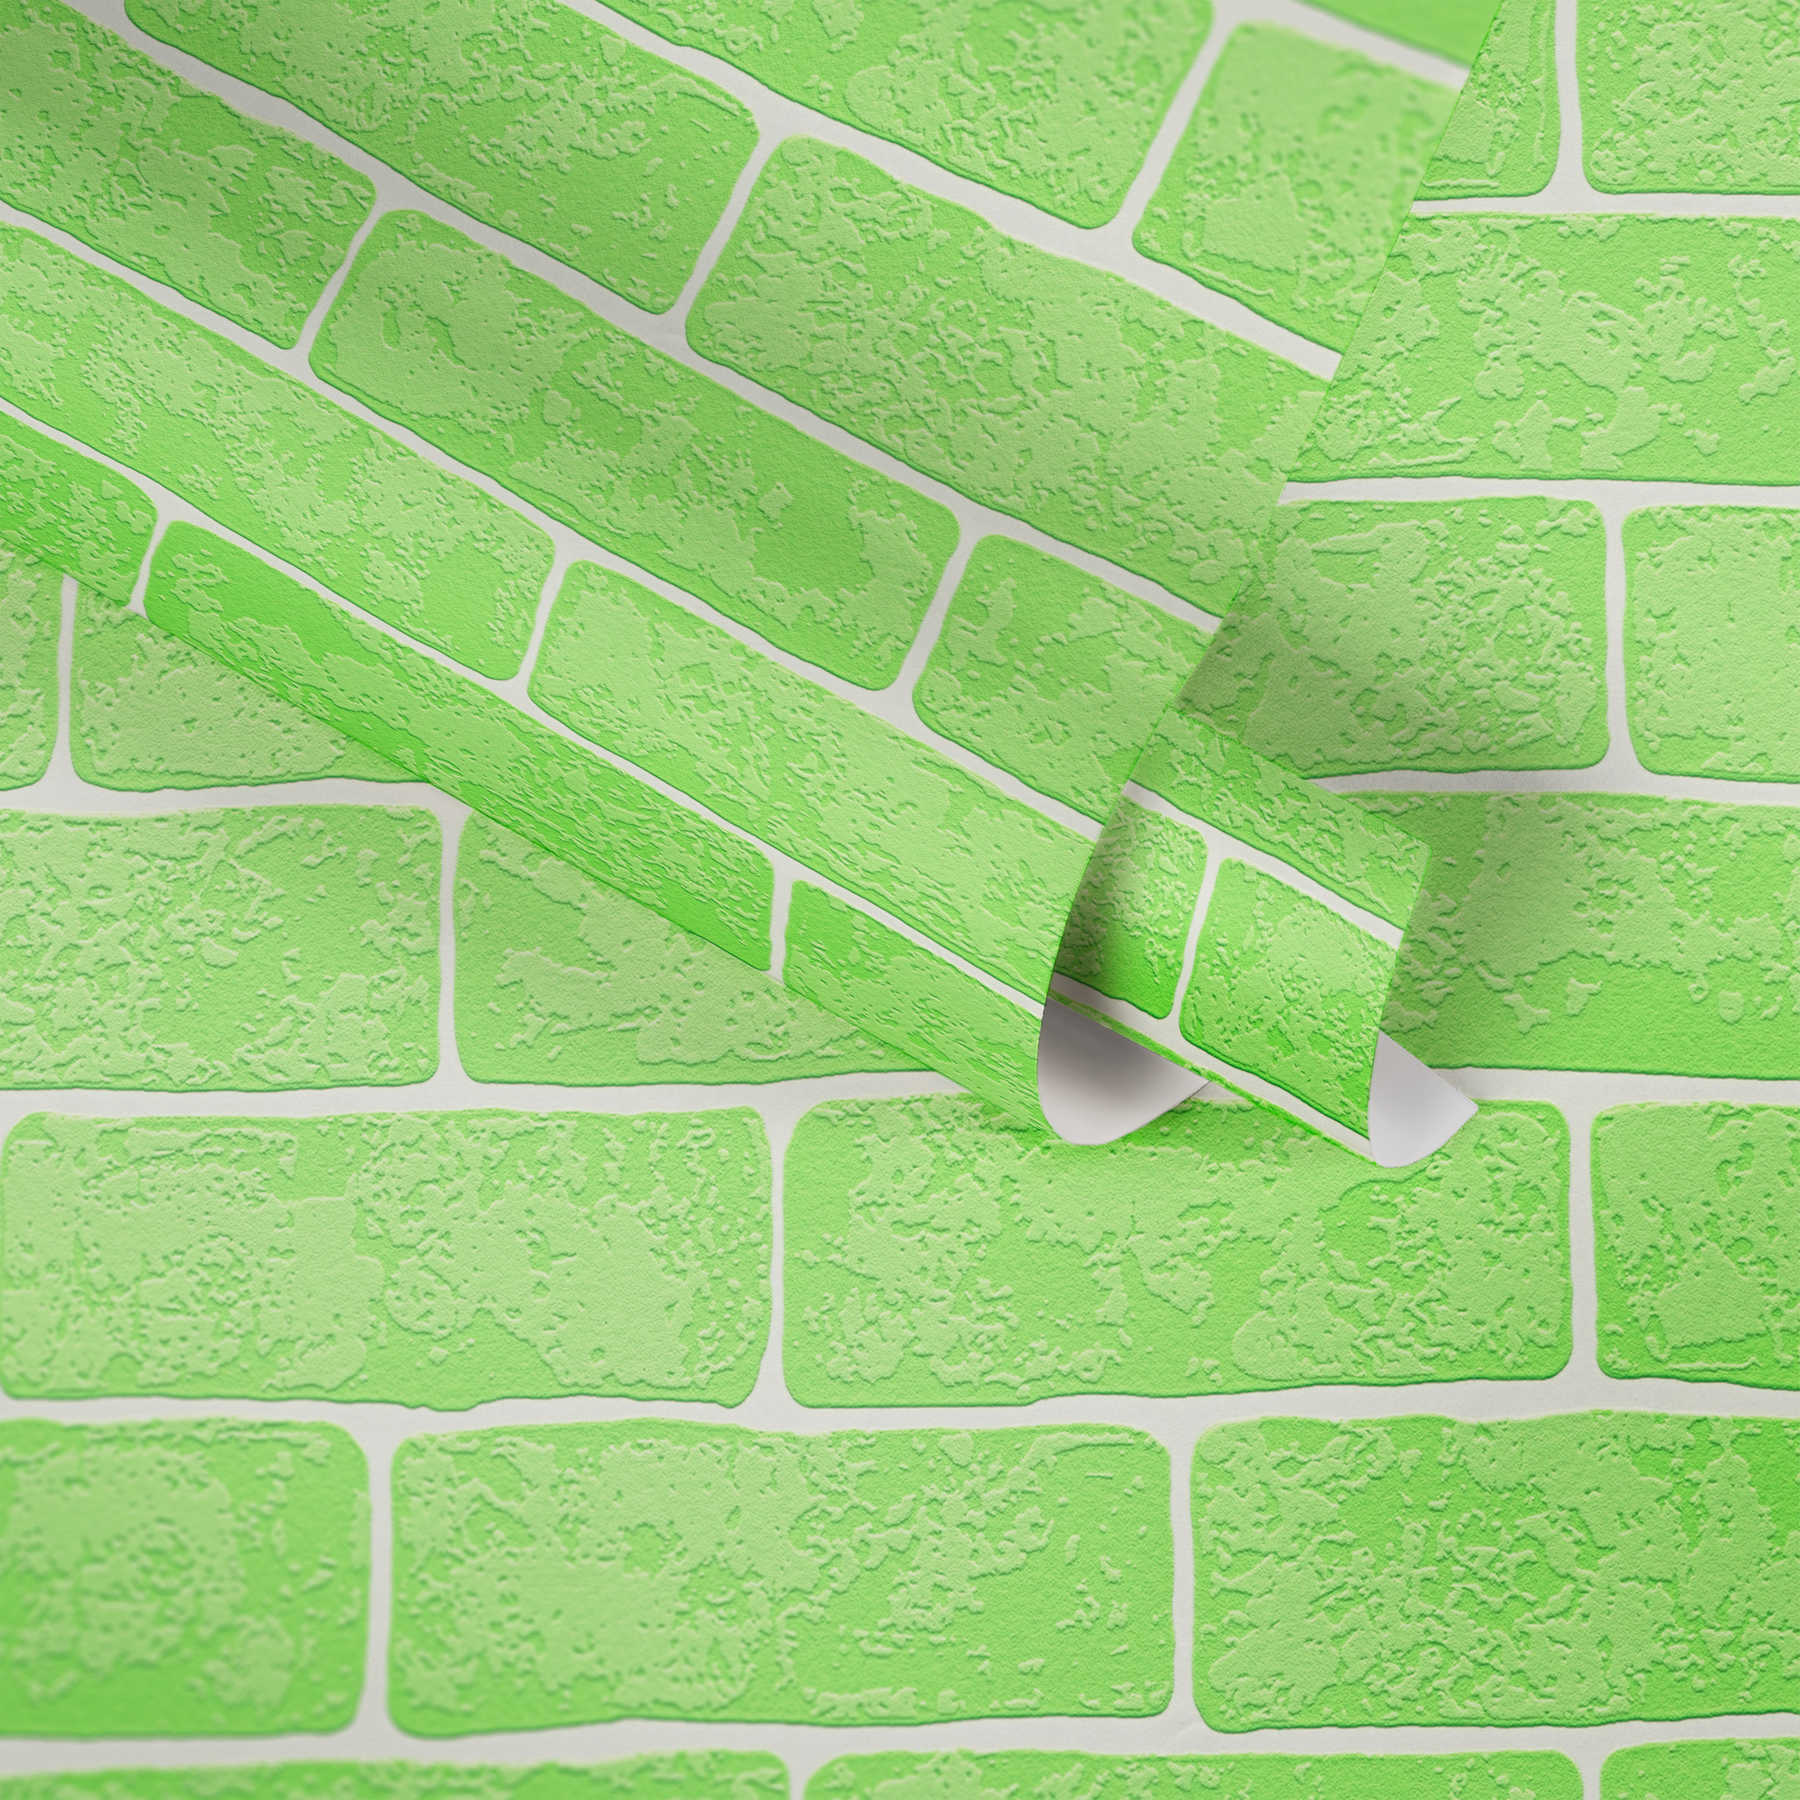             Non-woven wallpaper stone wall with 3D texture - green, white
        